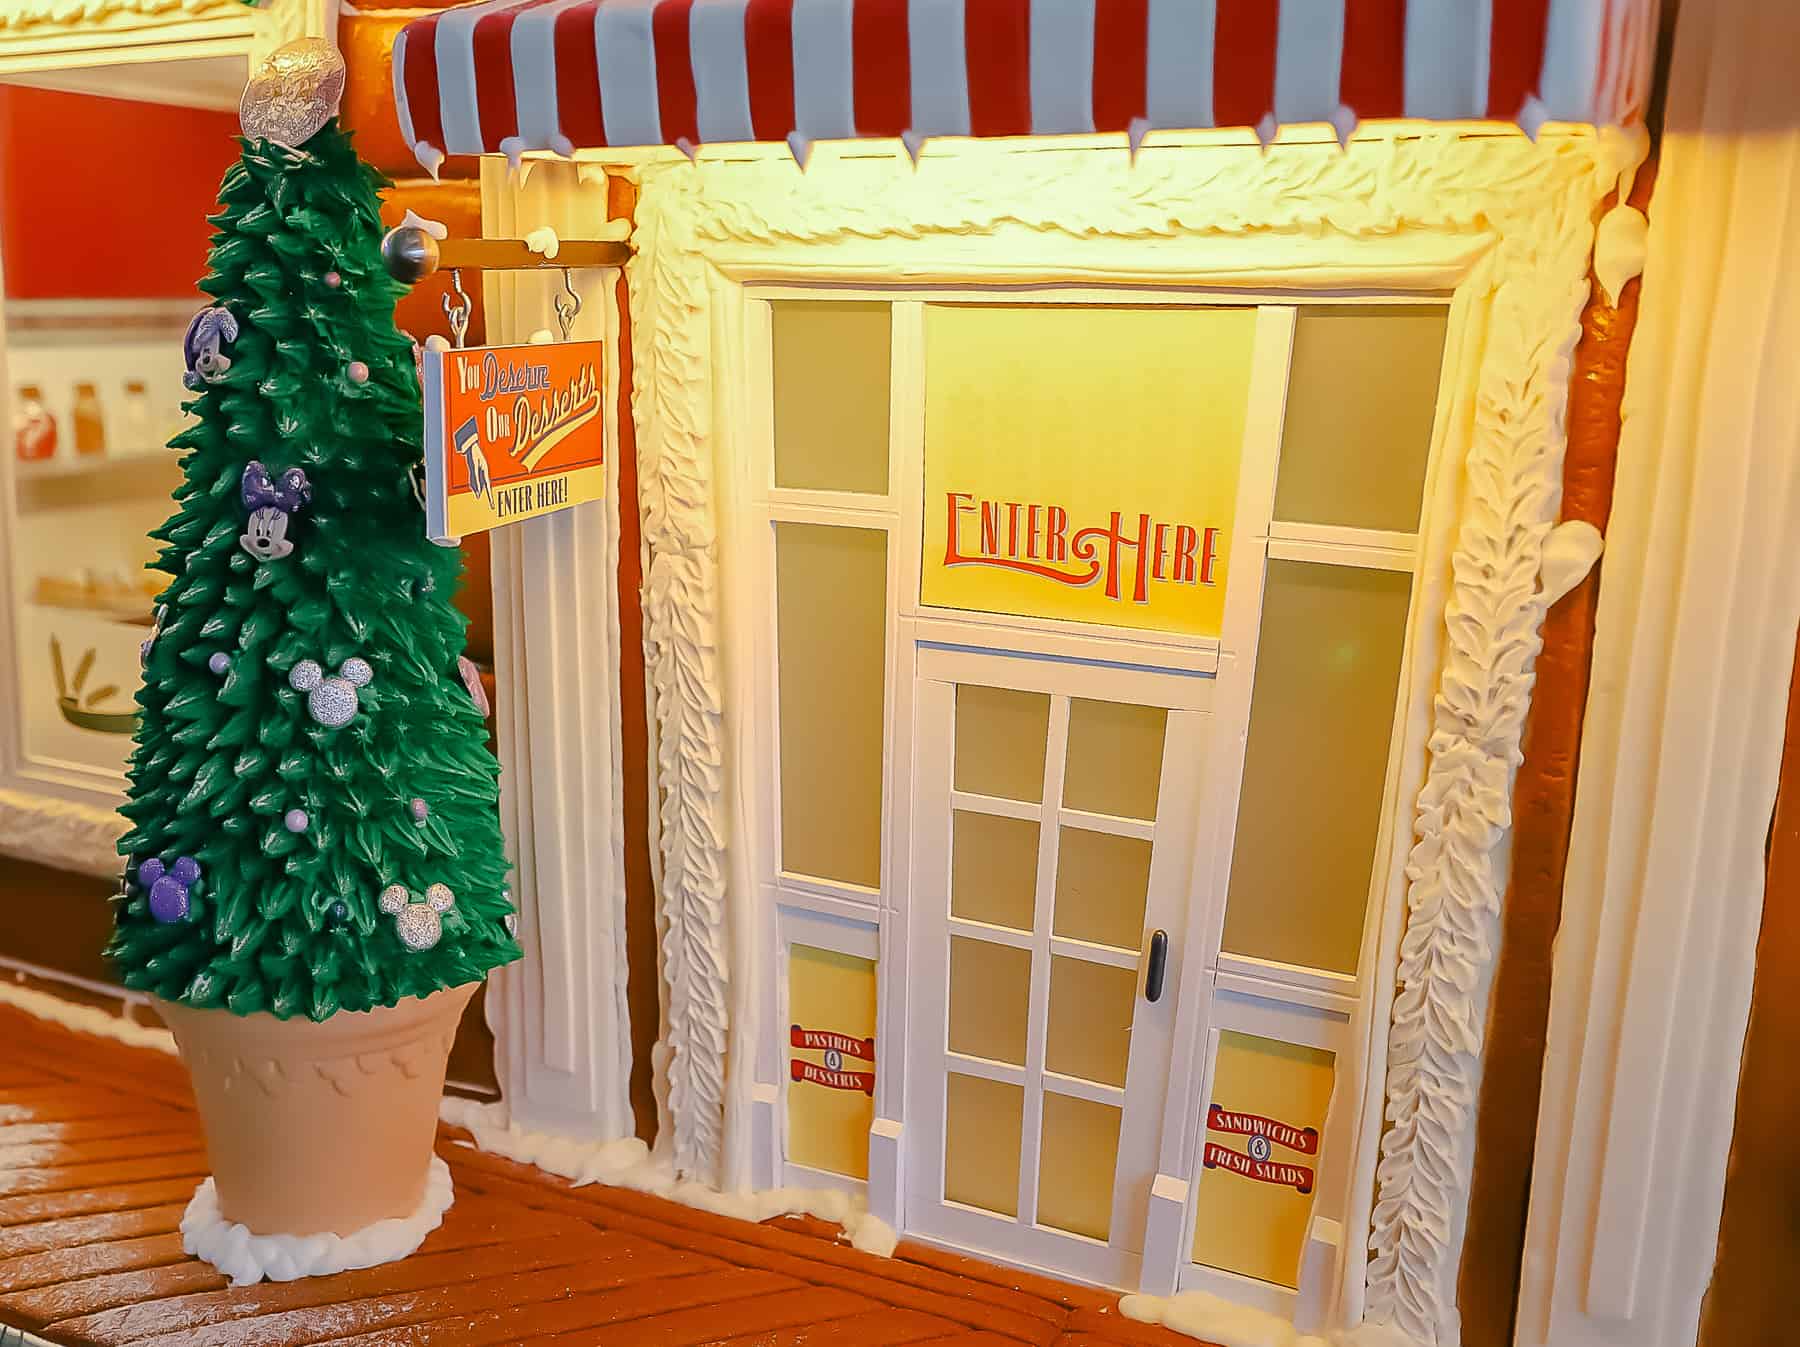 Entrance to the gingerbread house at Disney's Boardwalk